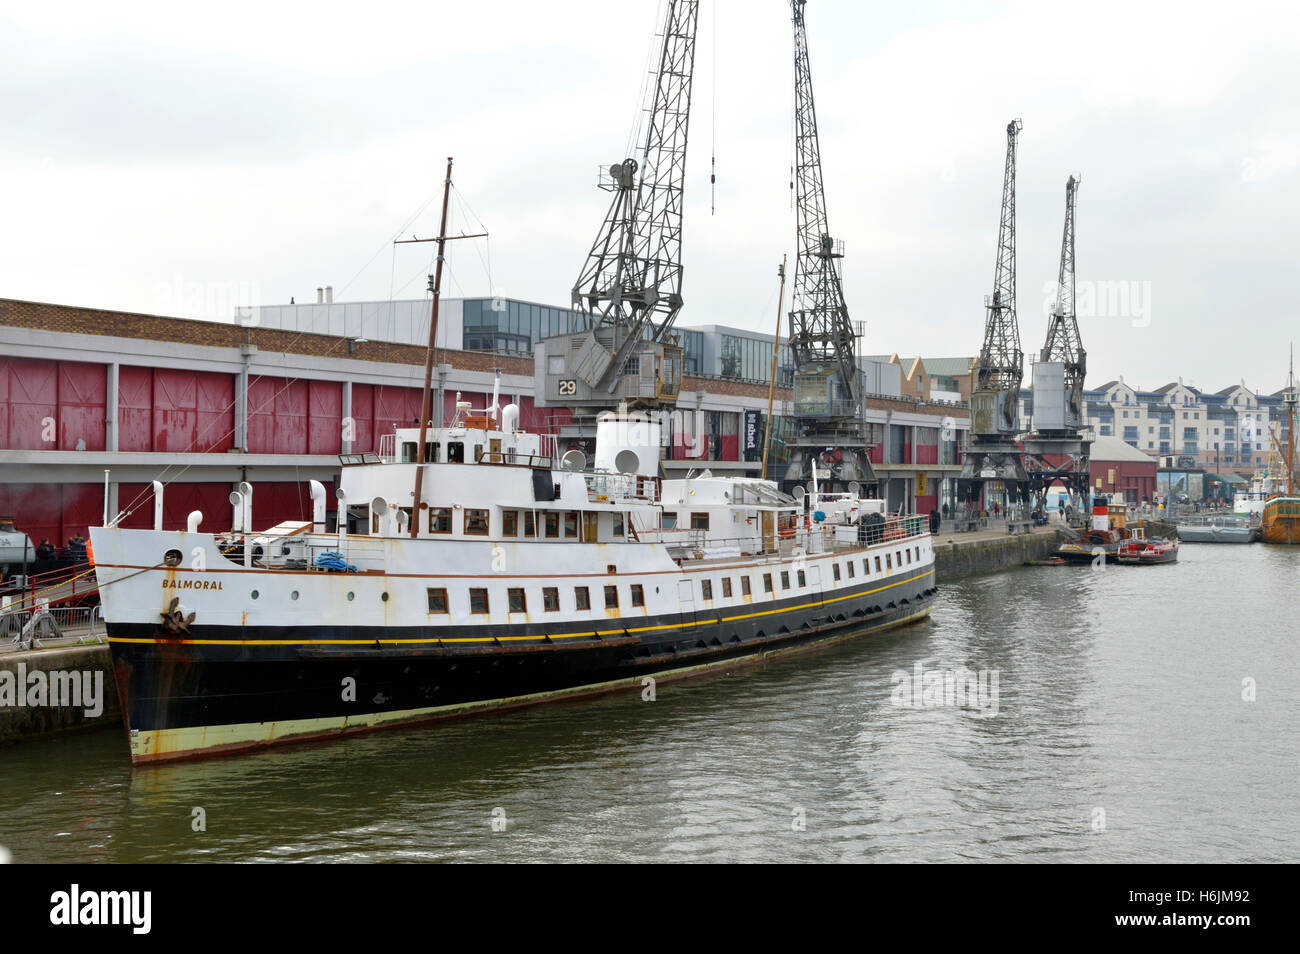 The MV Balmoral ship moored outside the M shed museum in Bristol's Floating Harbour with the old steam cranes in the background, Bristol, England, UK Stock Photo